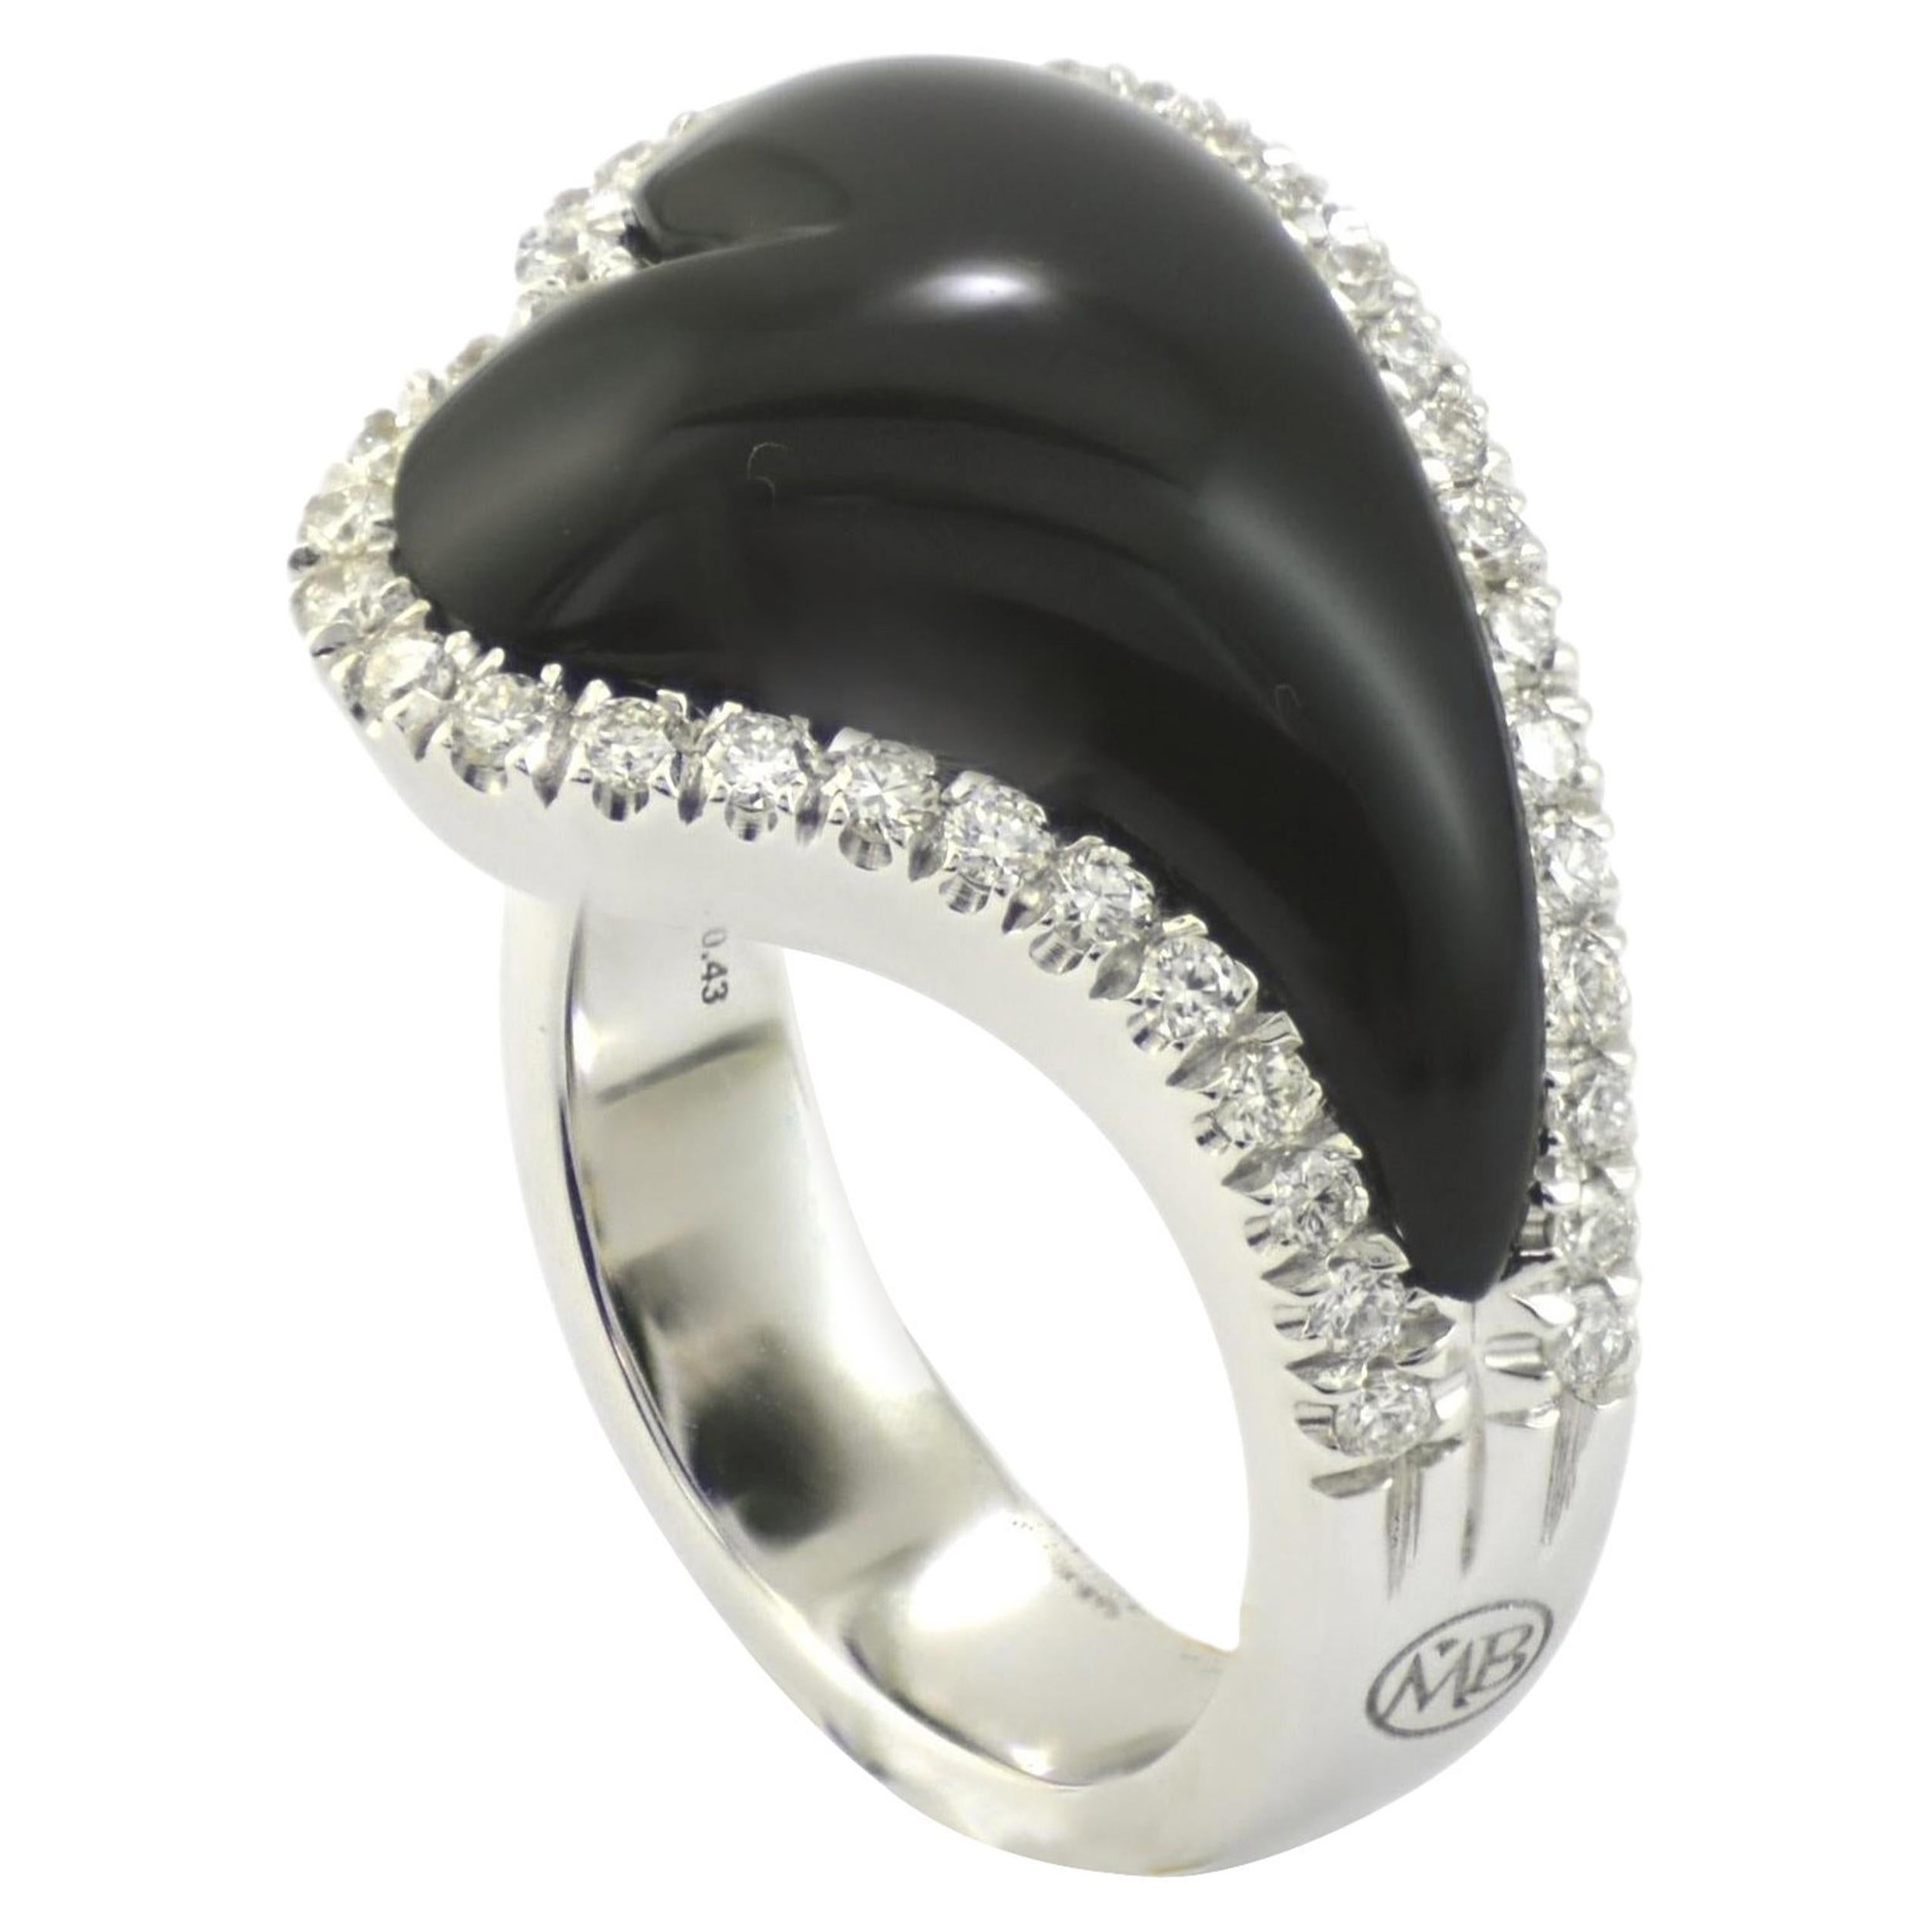 Handcrafted in Italy in Margherita Burgener family workshop, the ring is designed a stylized heart shape. 
Centering  a bombé carved onyx, surrounded by a line of diamonds.
Inside the ring you an appreciate open worked heart shaped